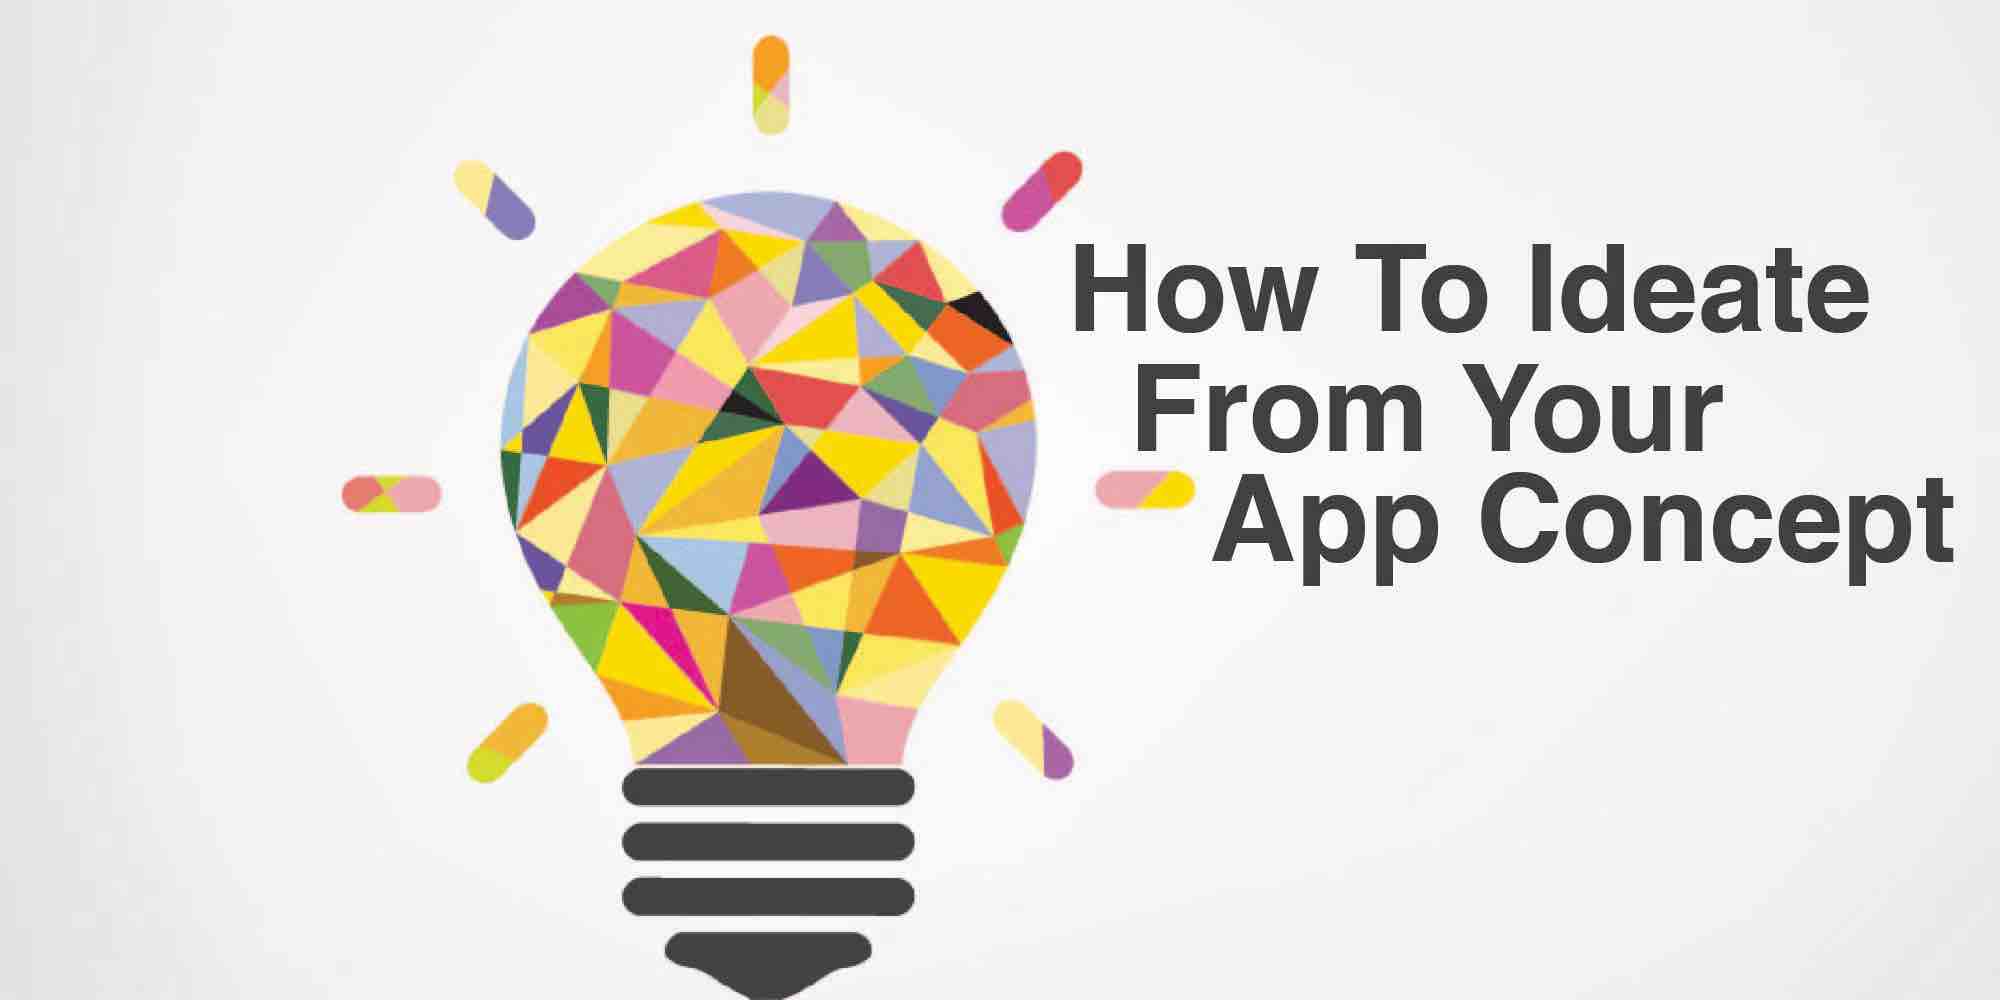 How To Ideate An App Concept